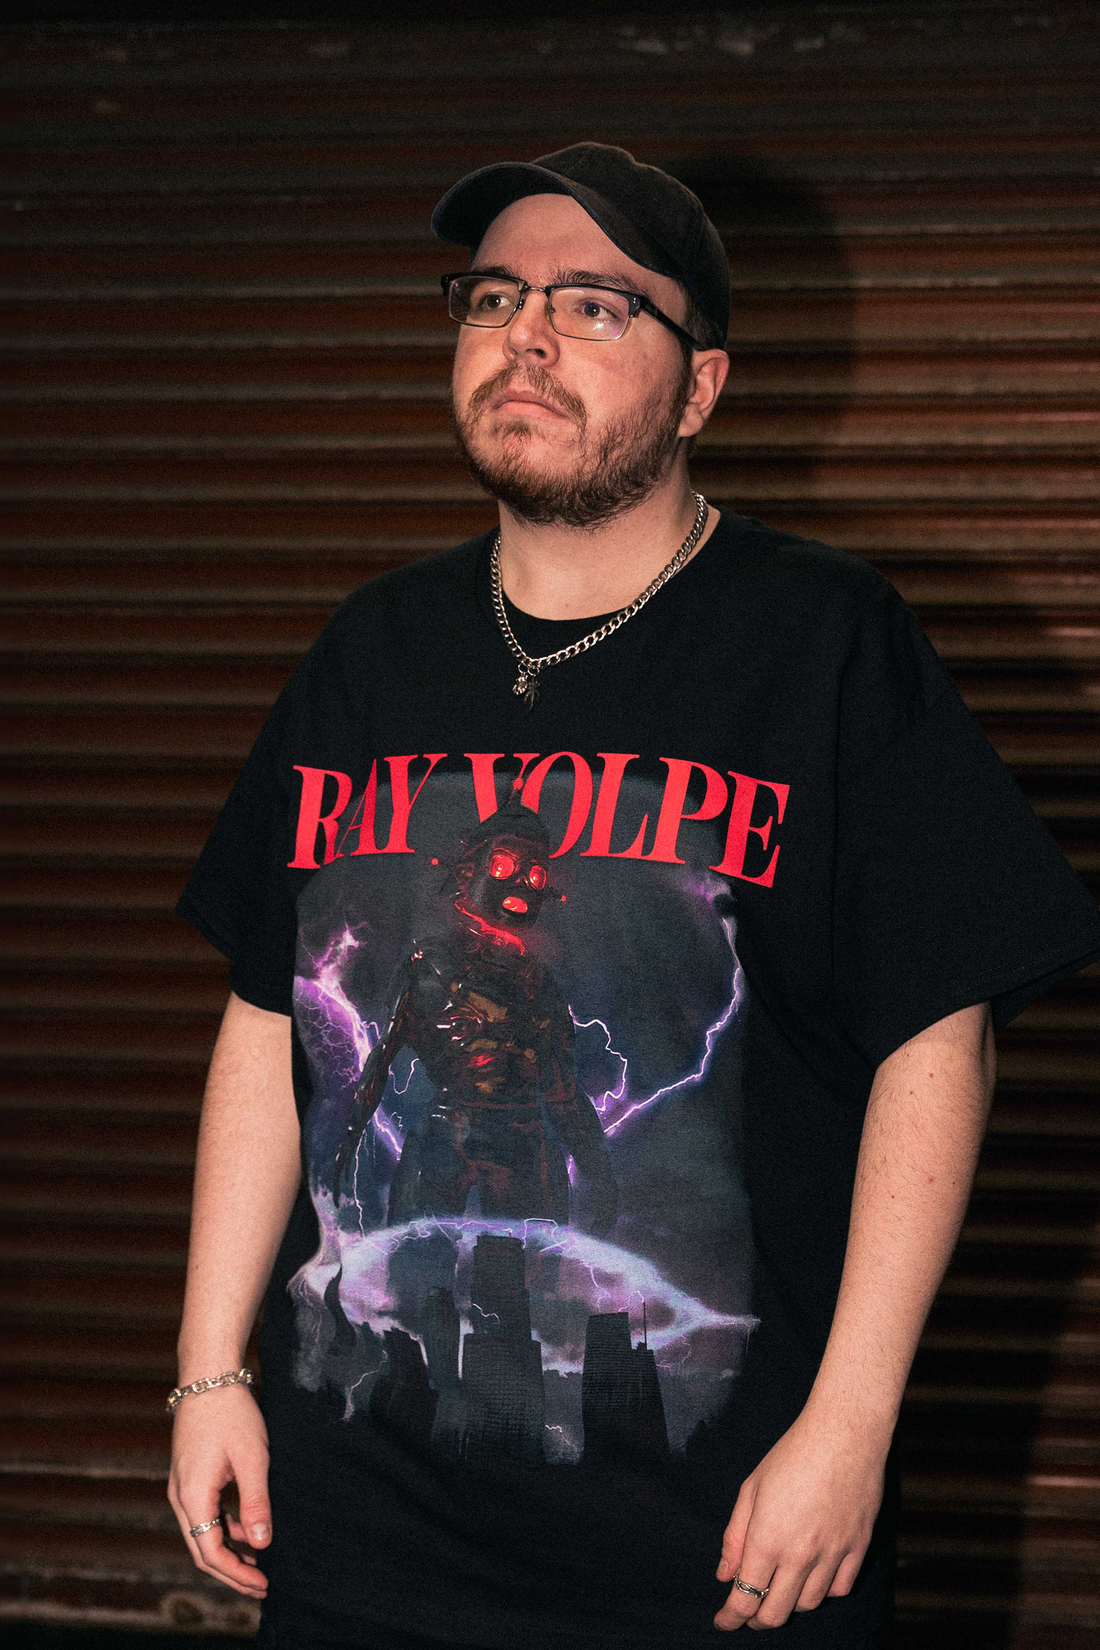 Ray Volpe - See You Drop - Black Tee